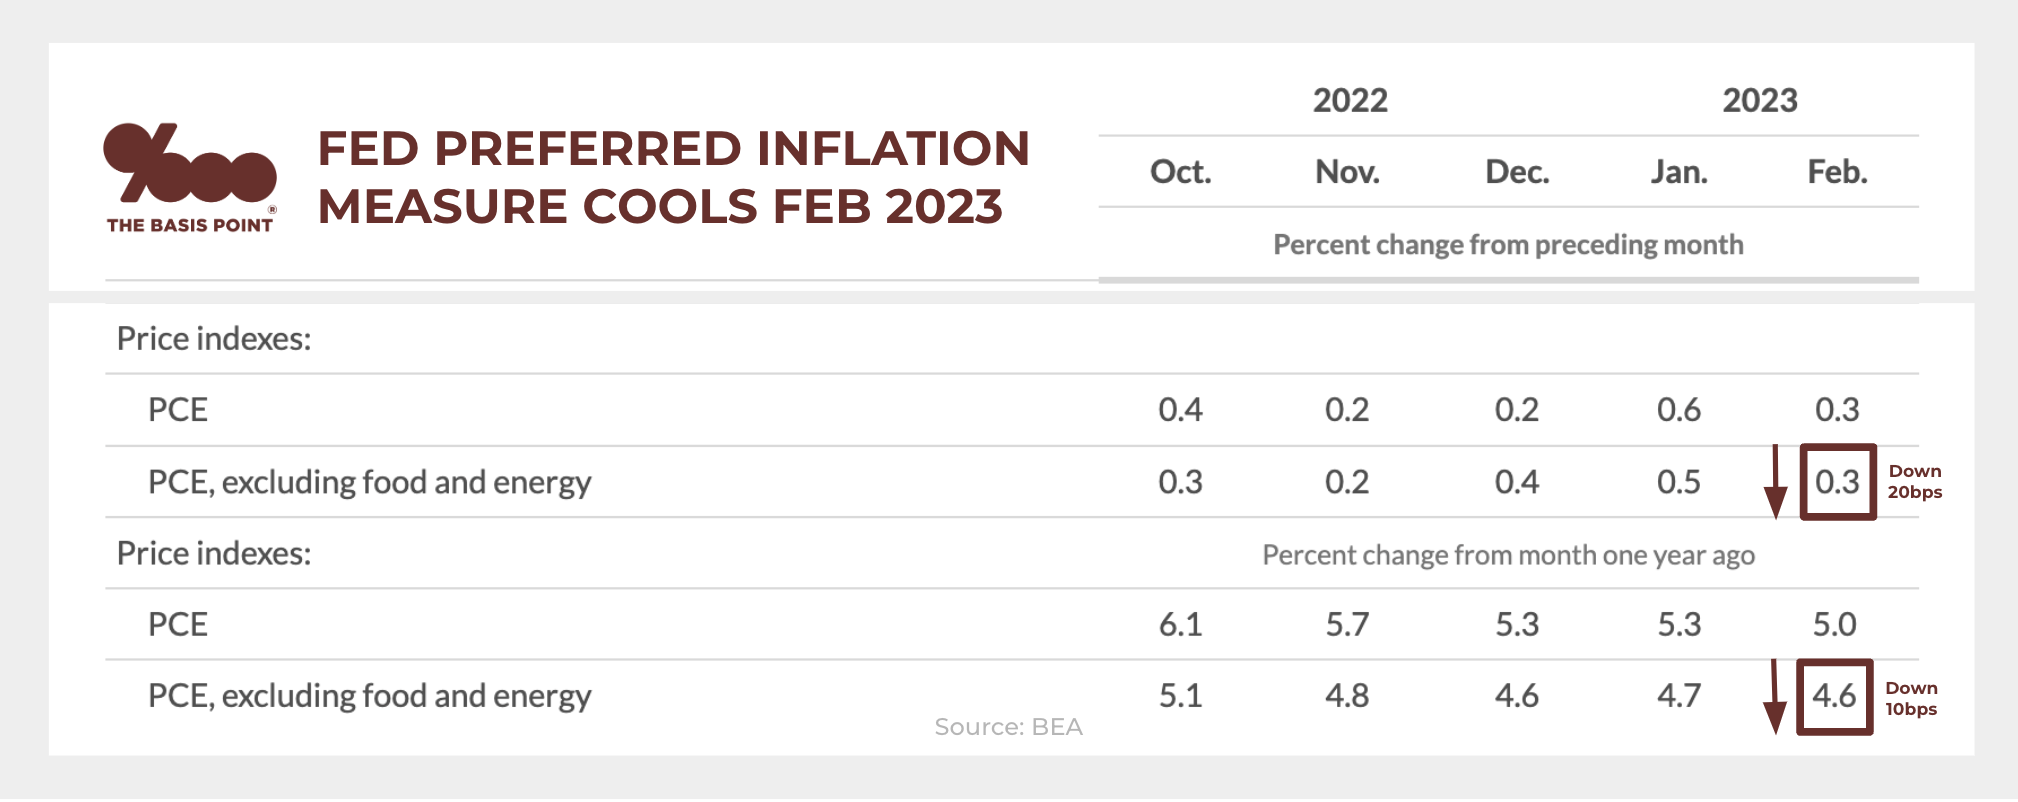 Core PCE consumer inflation down 20 basis points to 0.3% January to February 2023 and down 10 basis points to 4.6% YoY - The Basis Point